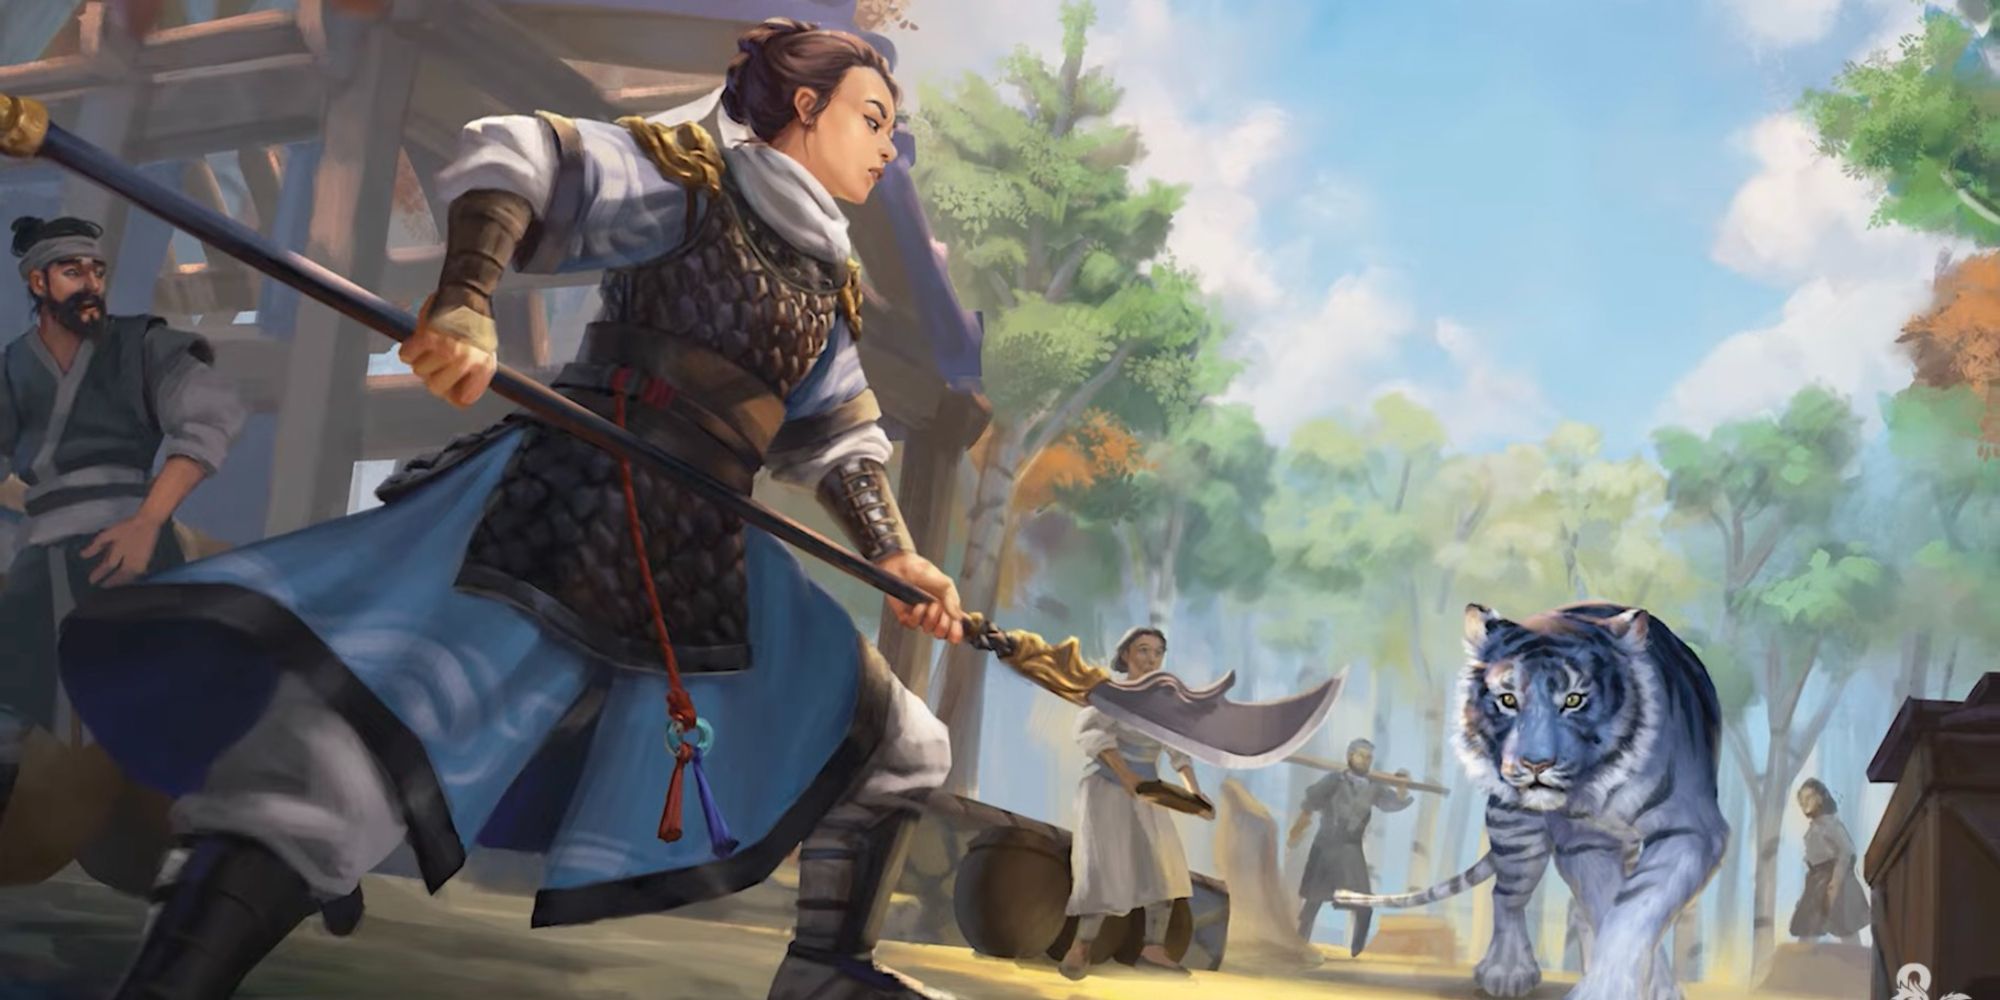 Journeys Through the Radiant Citadel introduces ghosts to D&D based on Korean folklore.